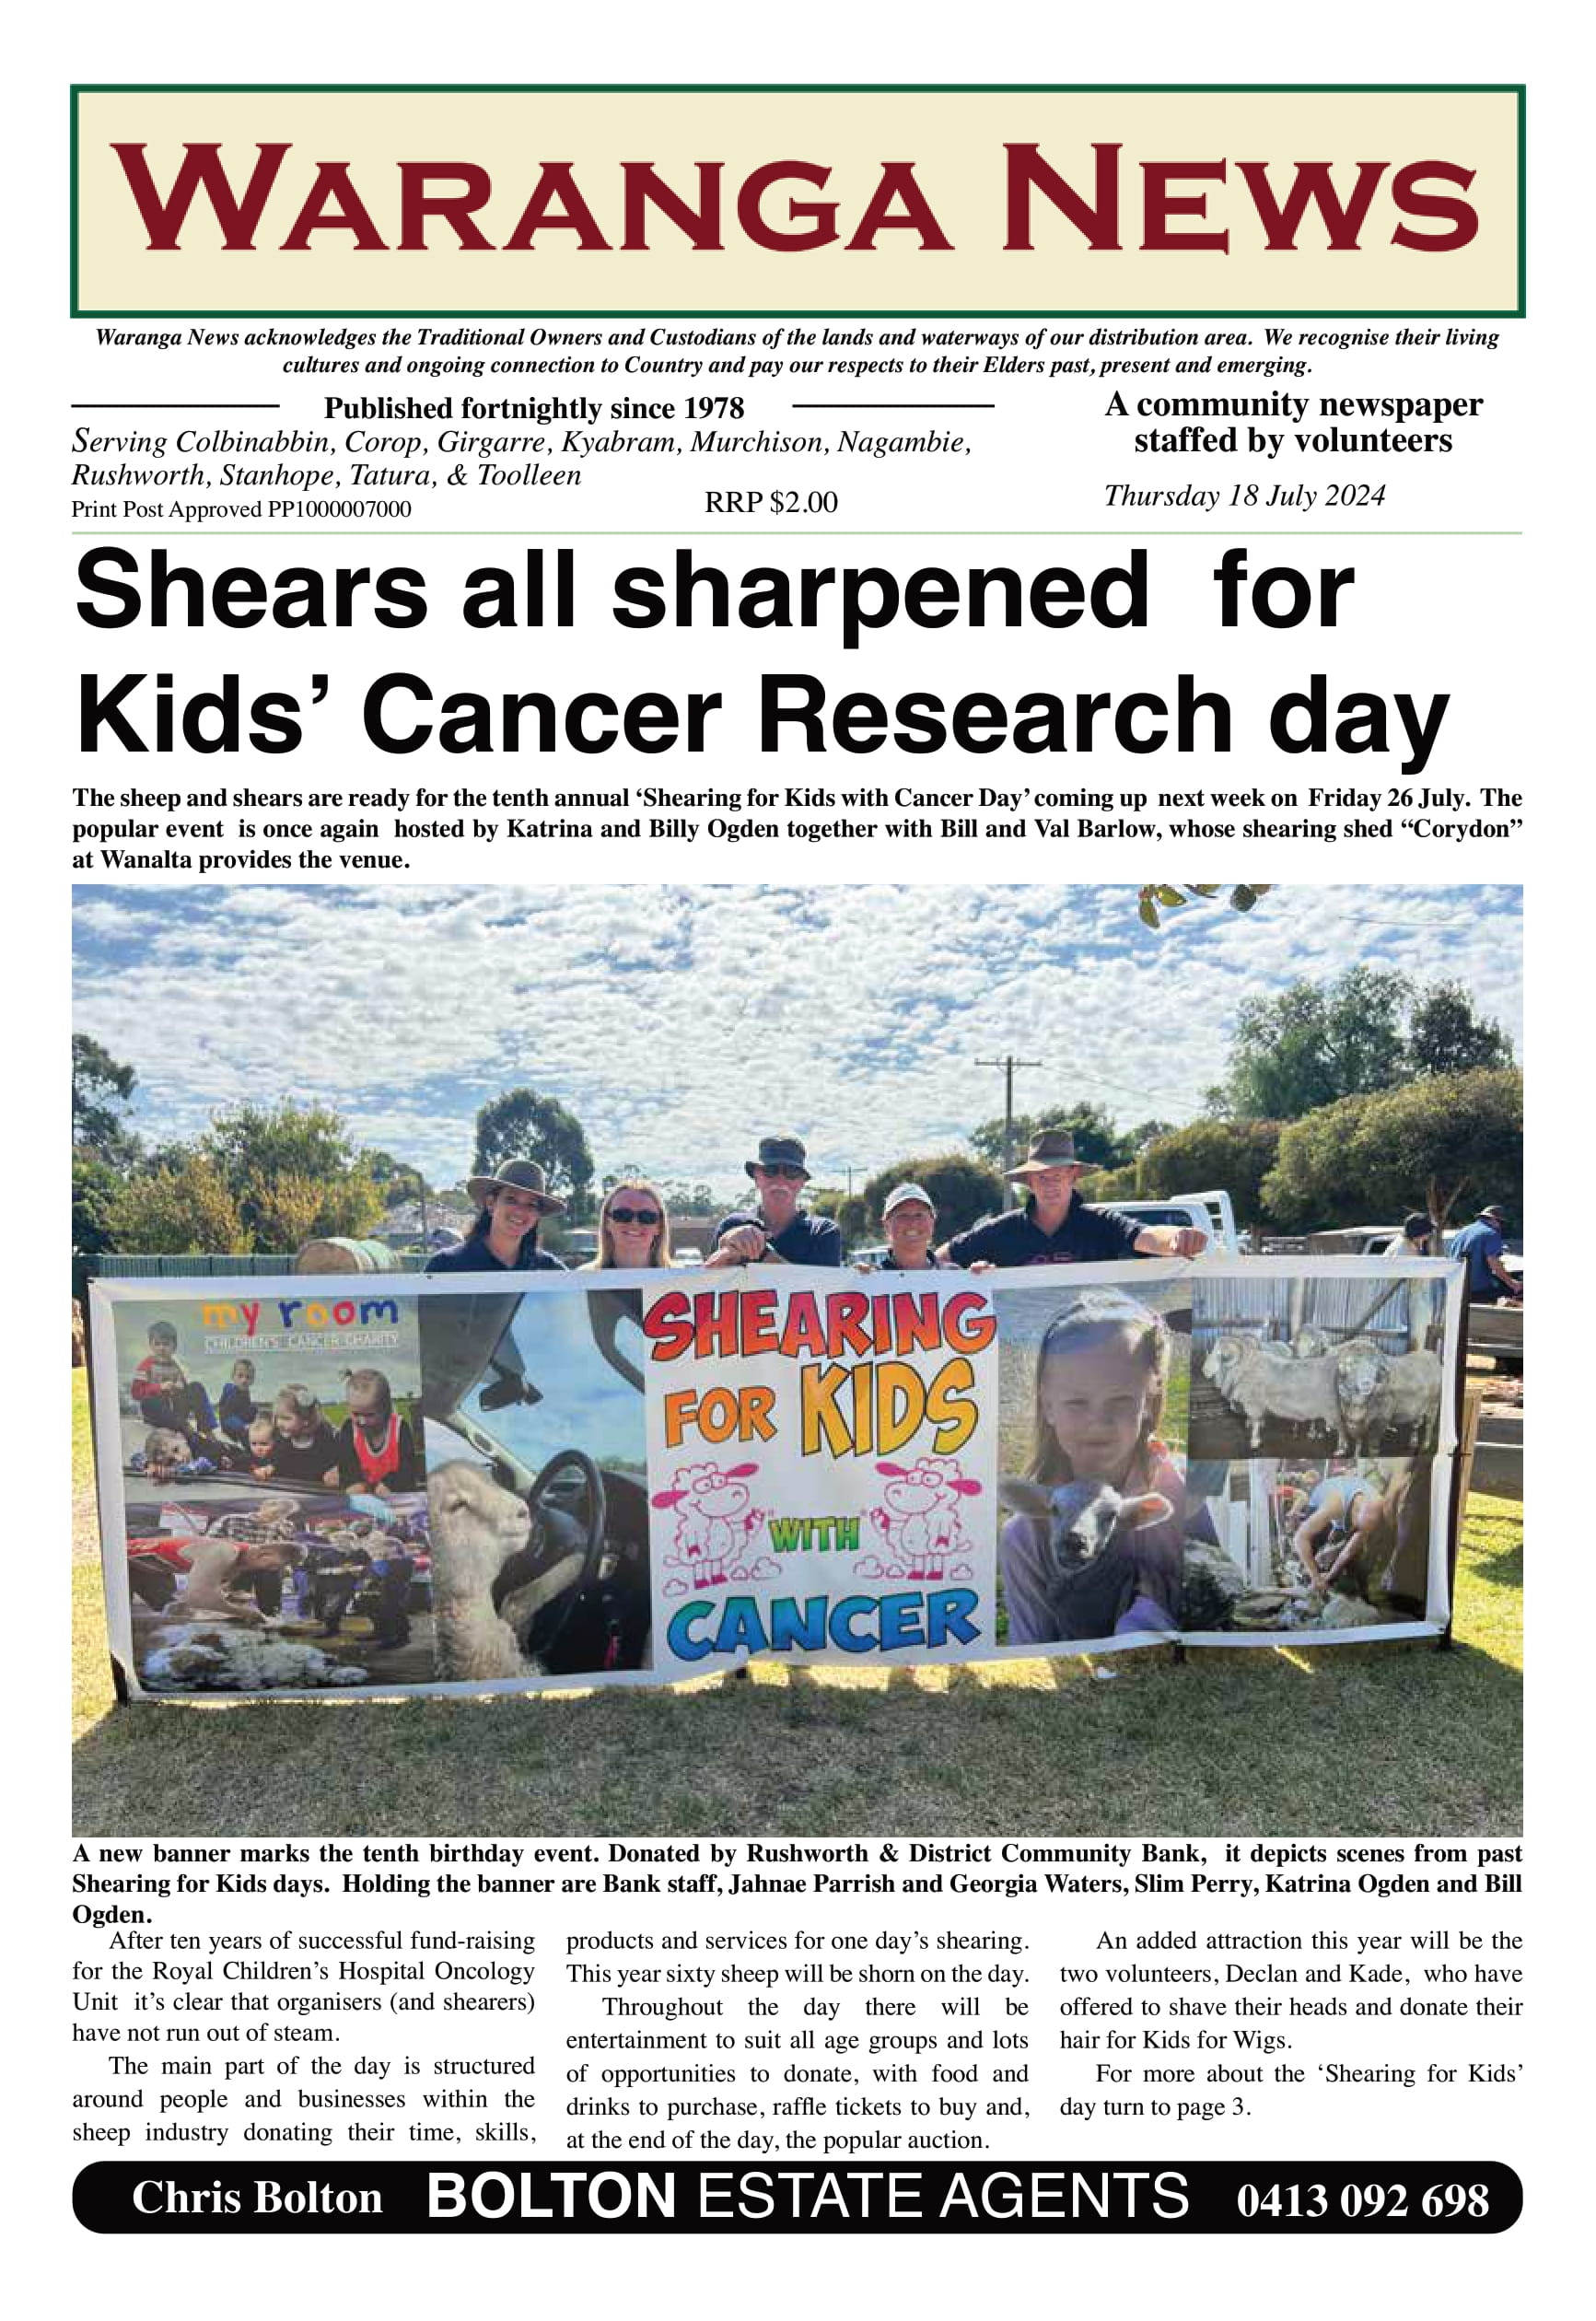 Shears all sharpened for Kids' Cancer Research day